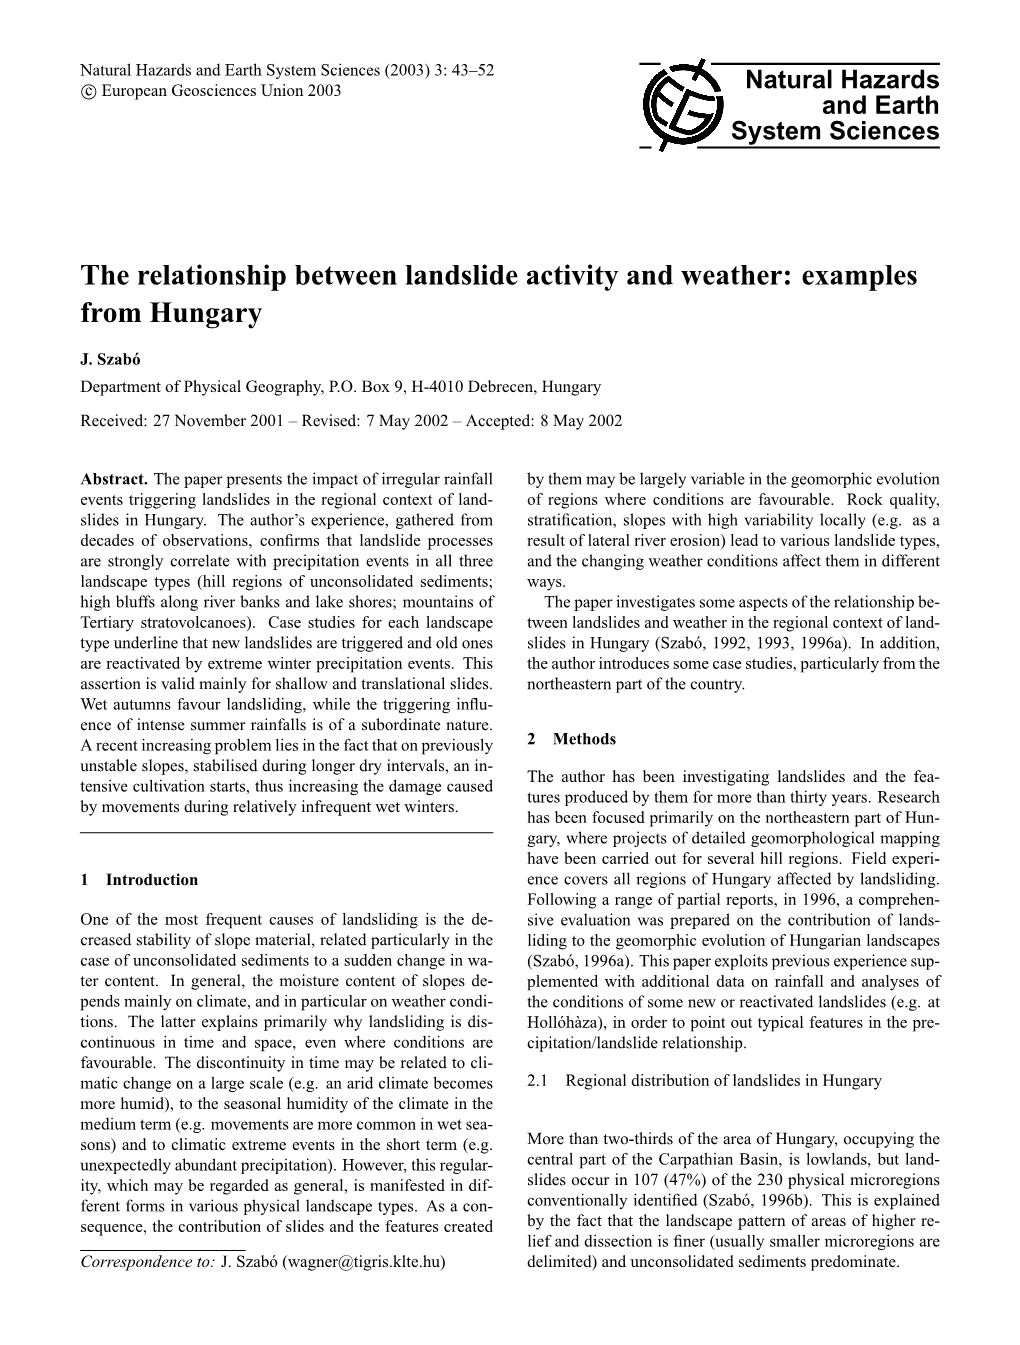 The Relationship Between Landslide Activity and Weather: Examples from Hungary